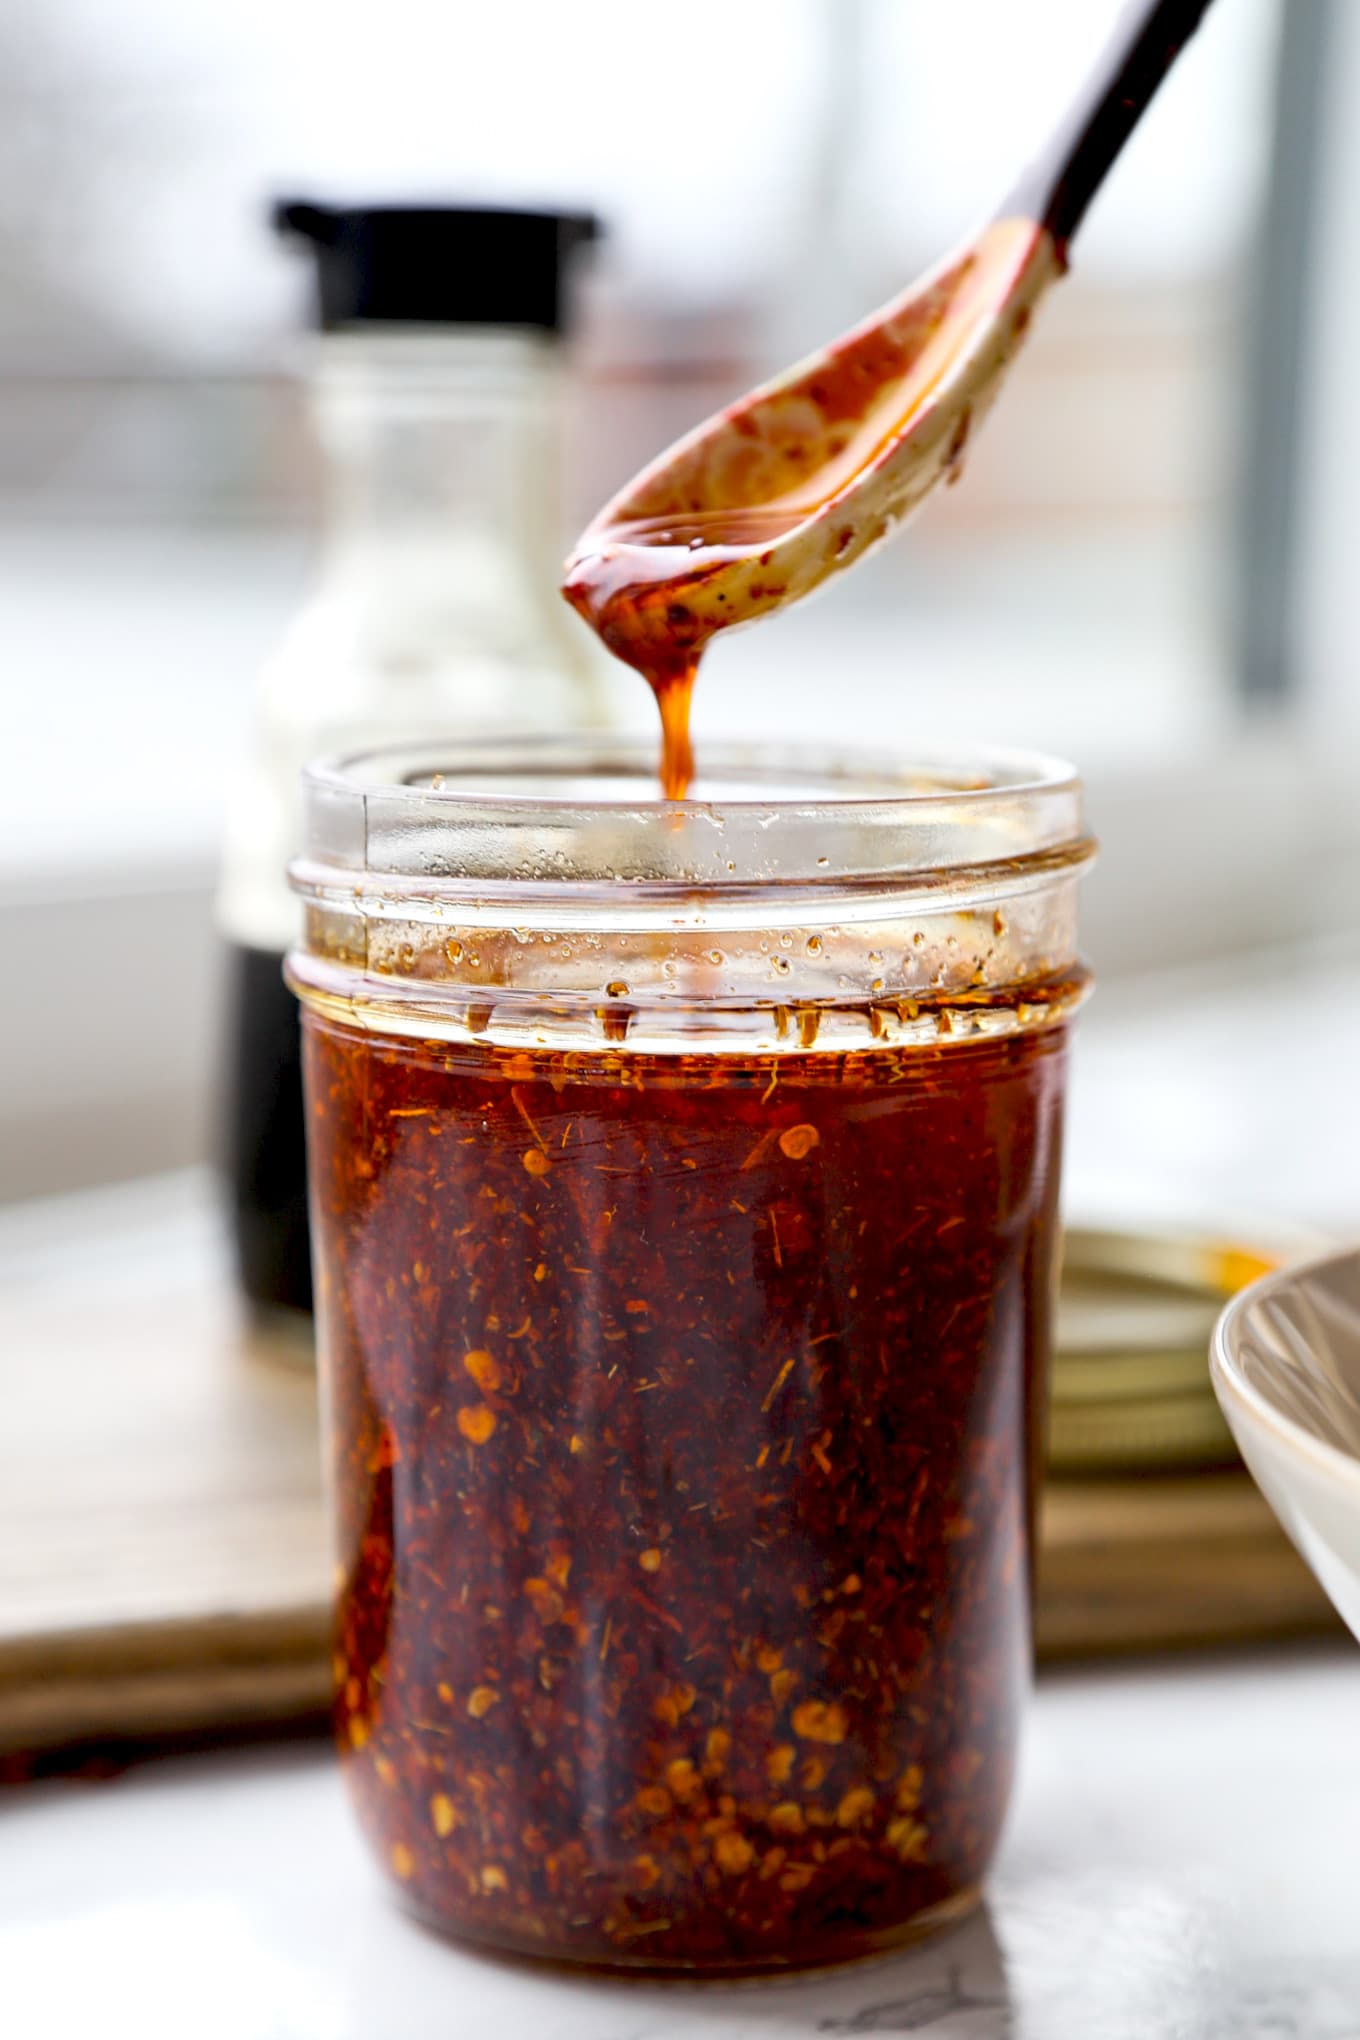 Hot Sichuan Chili Oil Pickled Plum Food And Drinks